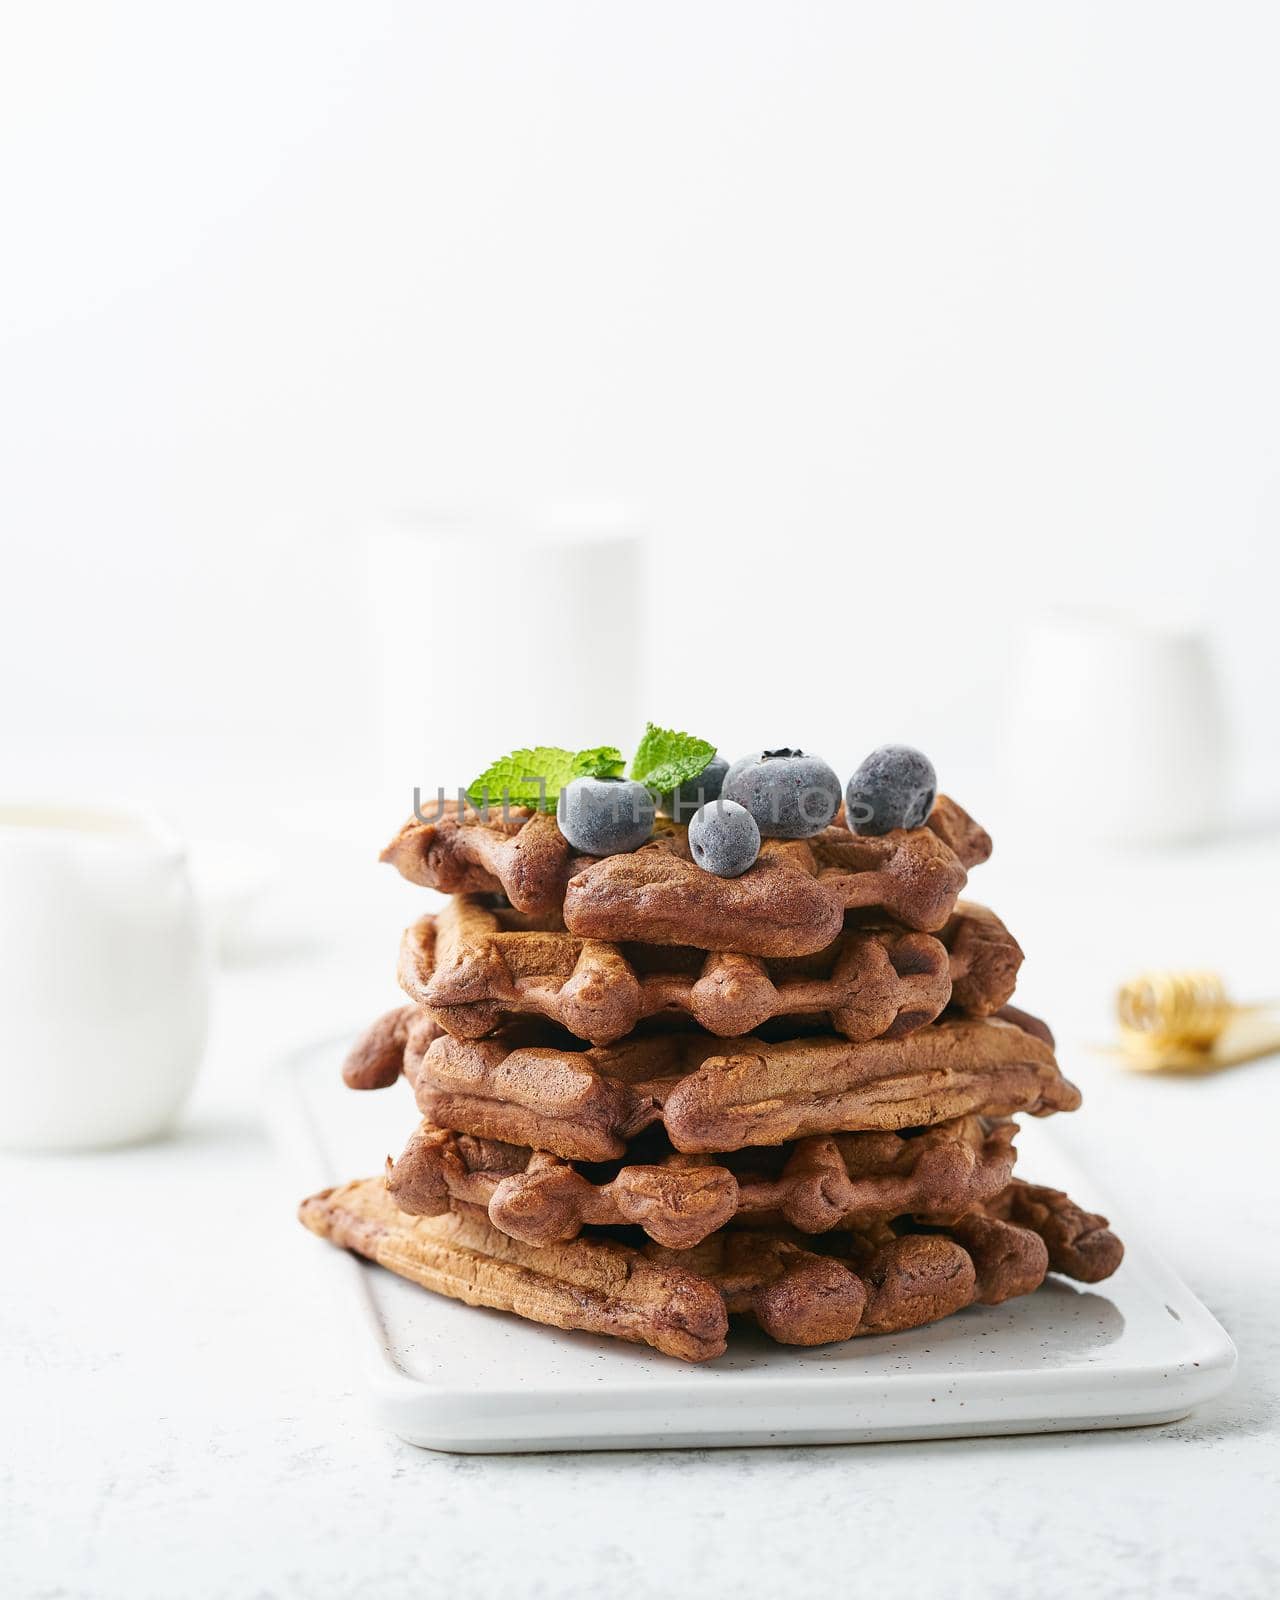 Chocolate banana waffles with blueberry on a white table. Side view, vertical